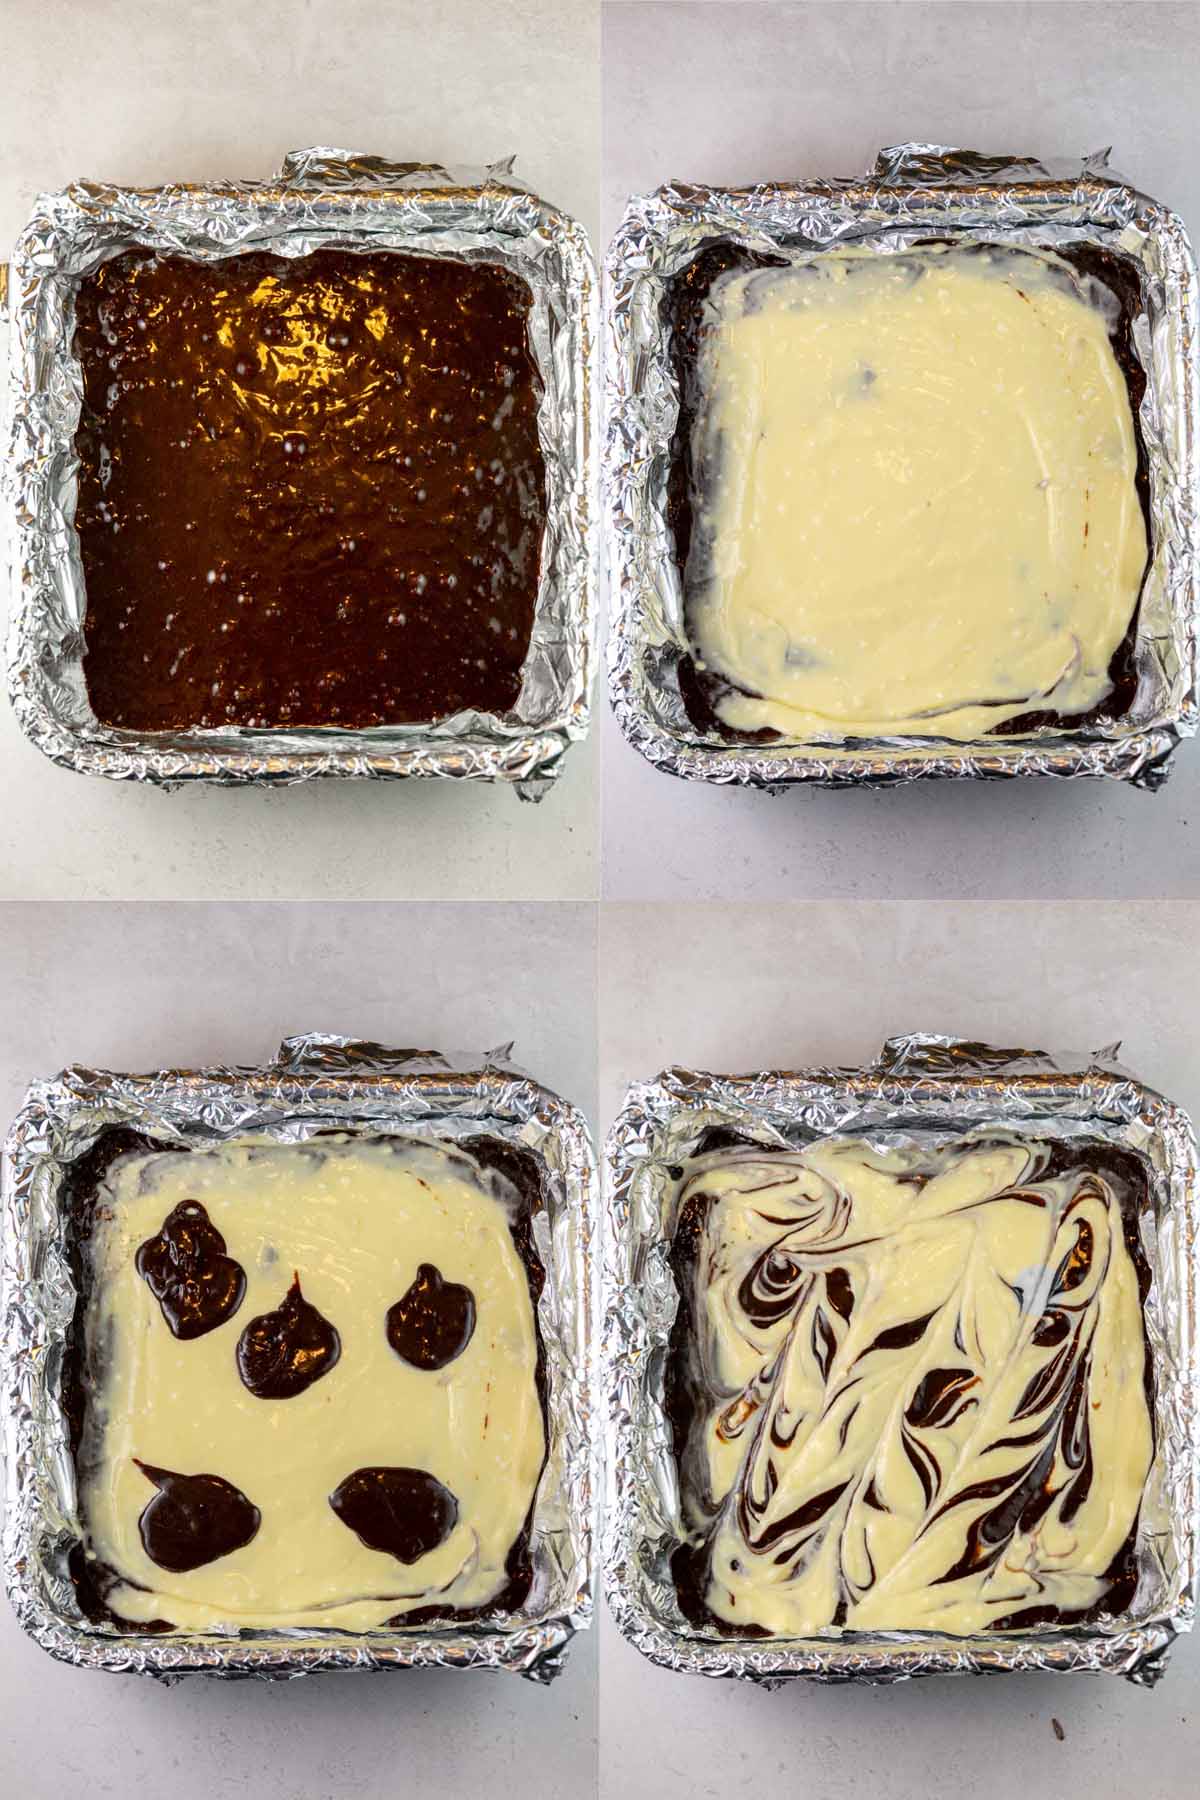 step by step photos of layering cream cheese and brownie batter to swirl